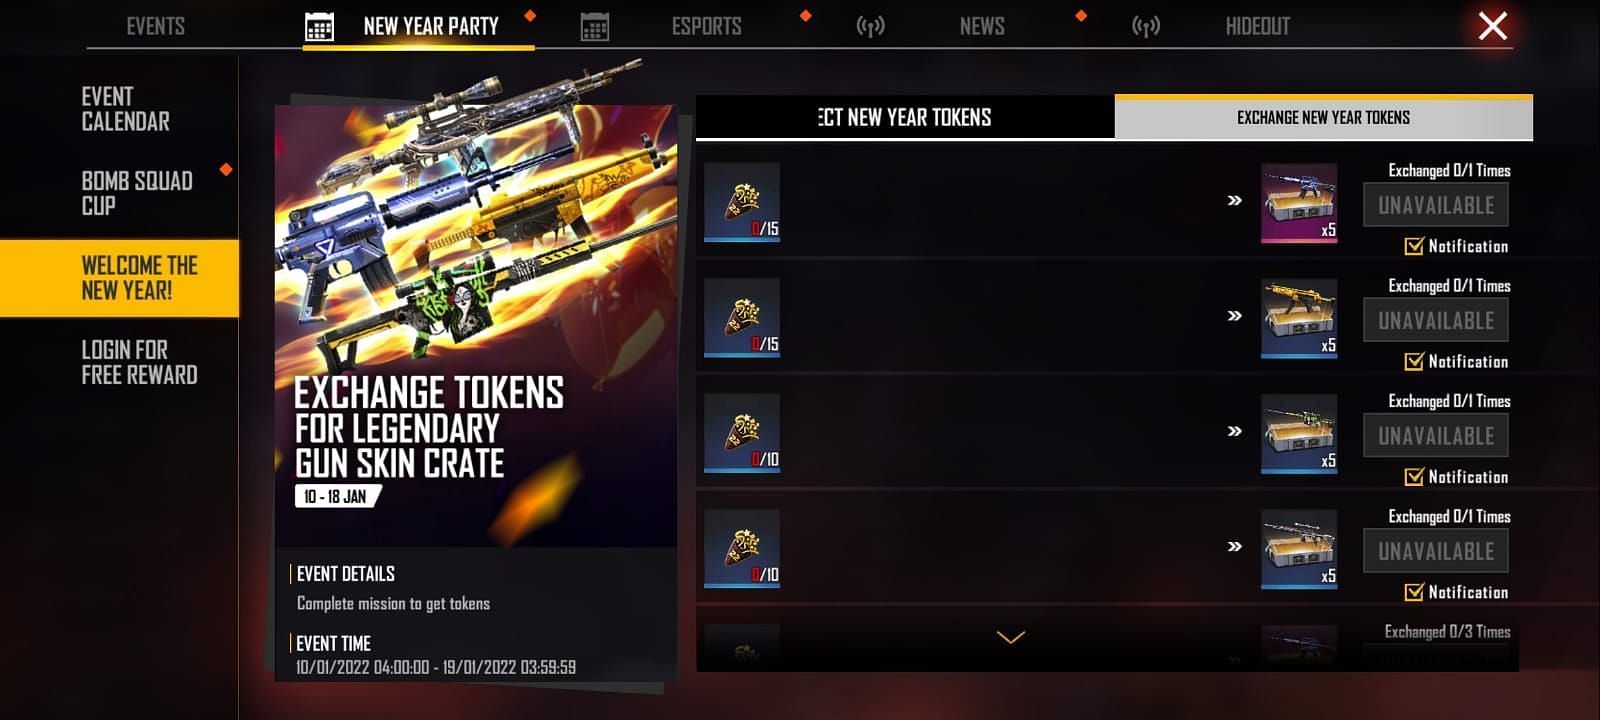 &#039;New Year Party&#039; section (Image via Free Fire)